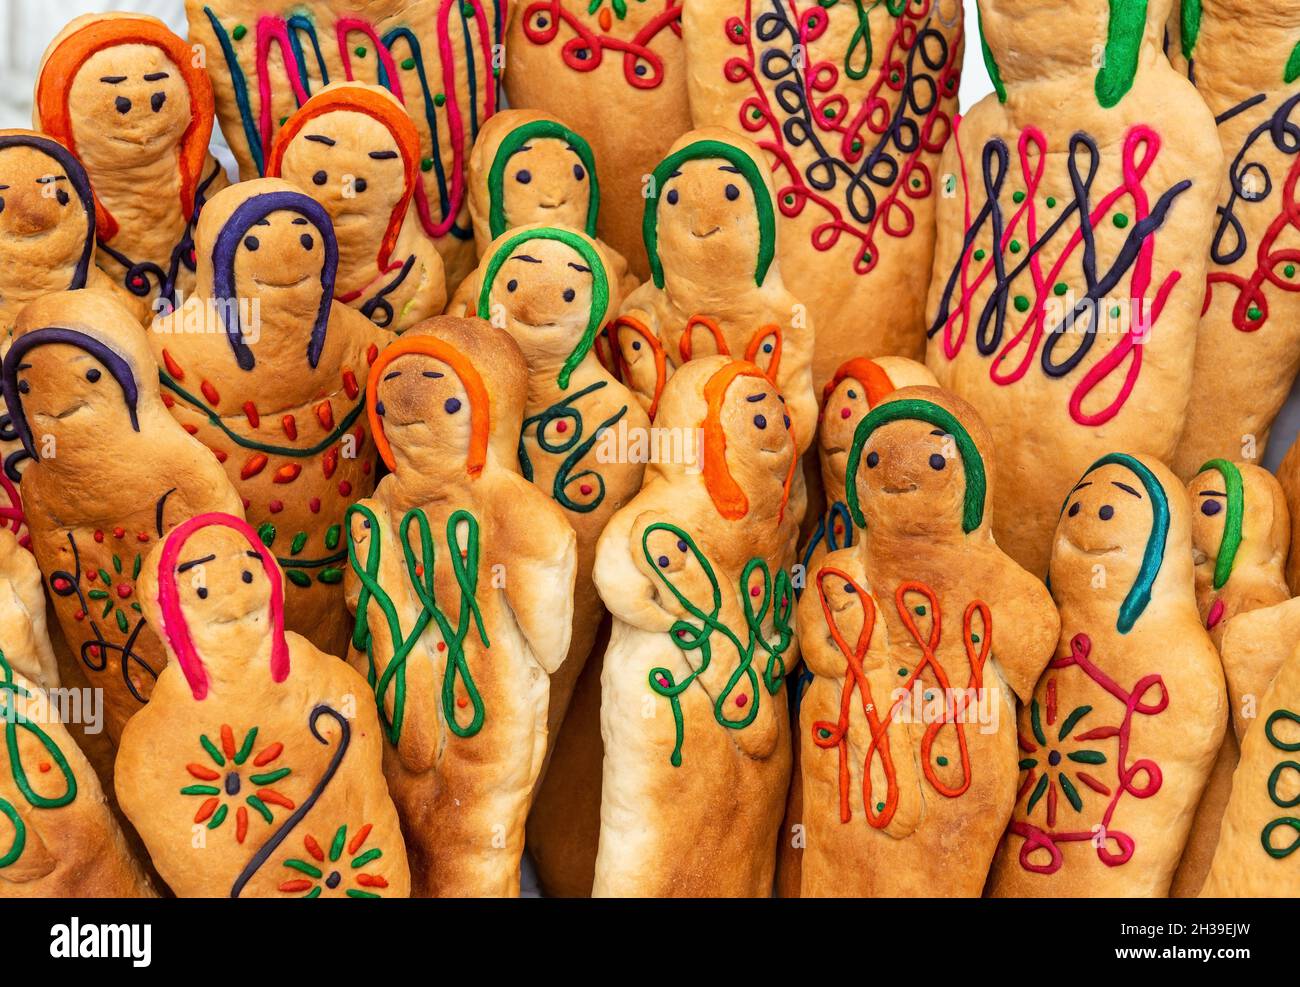 The Guaguas de Pan or Bread Children found on a local market in Otavalo, Ecuador. It's a tradition to make these breads for All Saints Day. Stock Photo